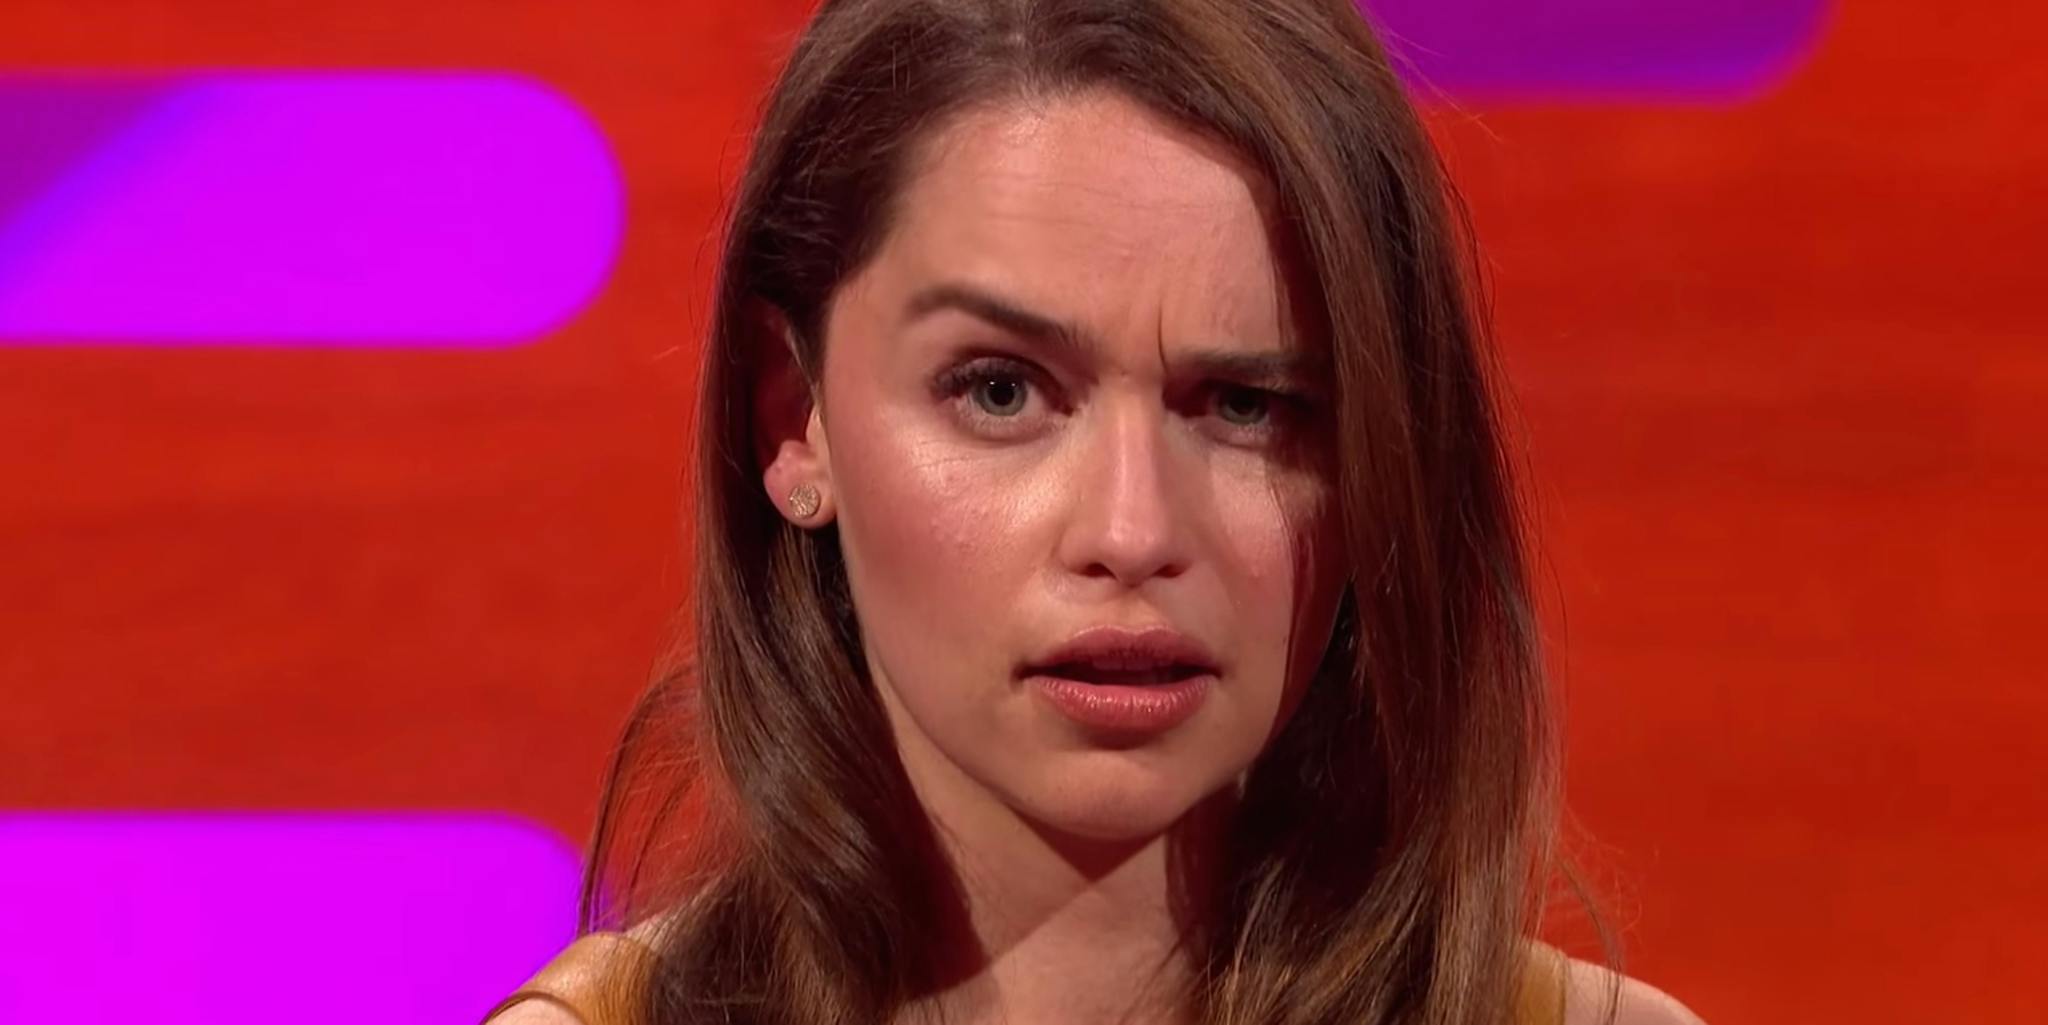 Cara Delevingne and Emilia Clarke have an eyebrow-off.